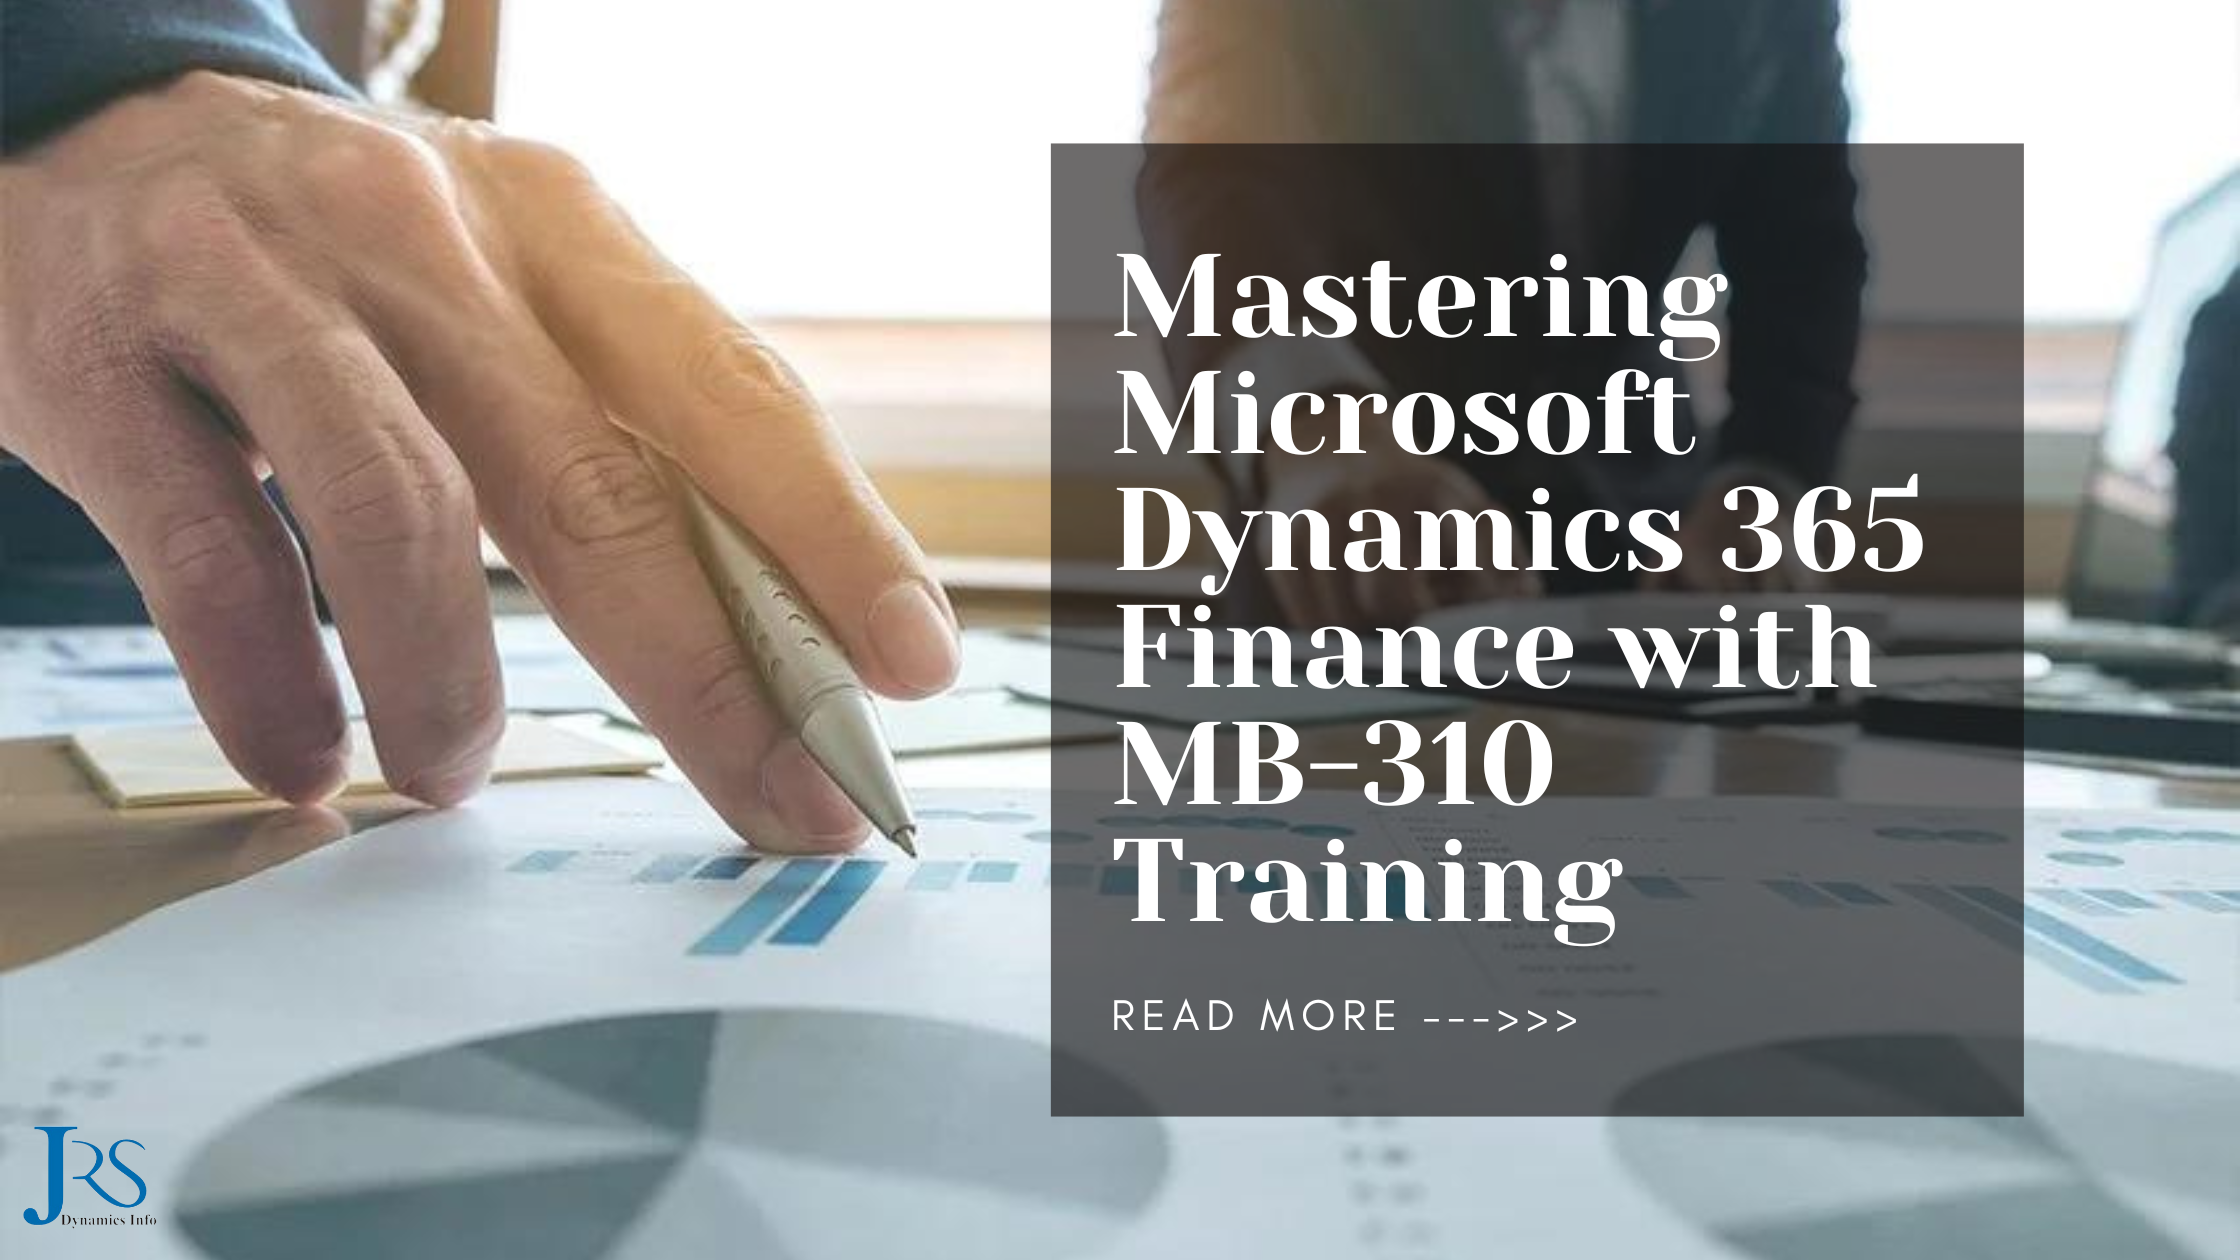 Unlock the potential of Microsoft Dynamics 365 Finance with comprehensive MB-310 training. Learn from experts and gain essential skills to boost your career in India, UAE, USA, Singapore, Malaysia, and the Philippines.